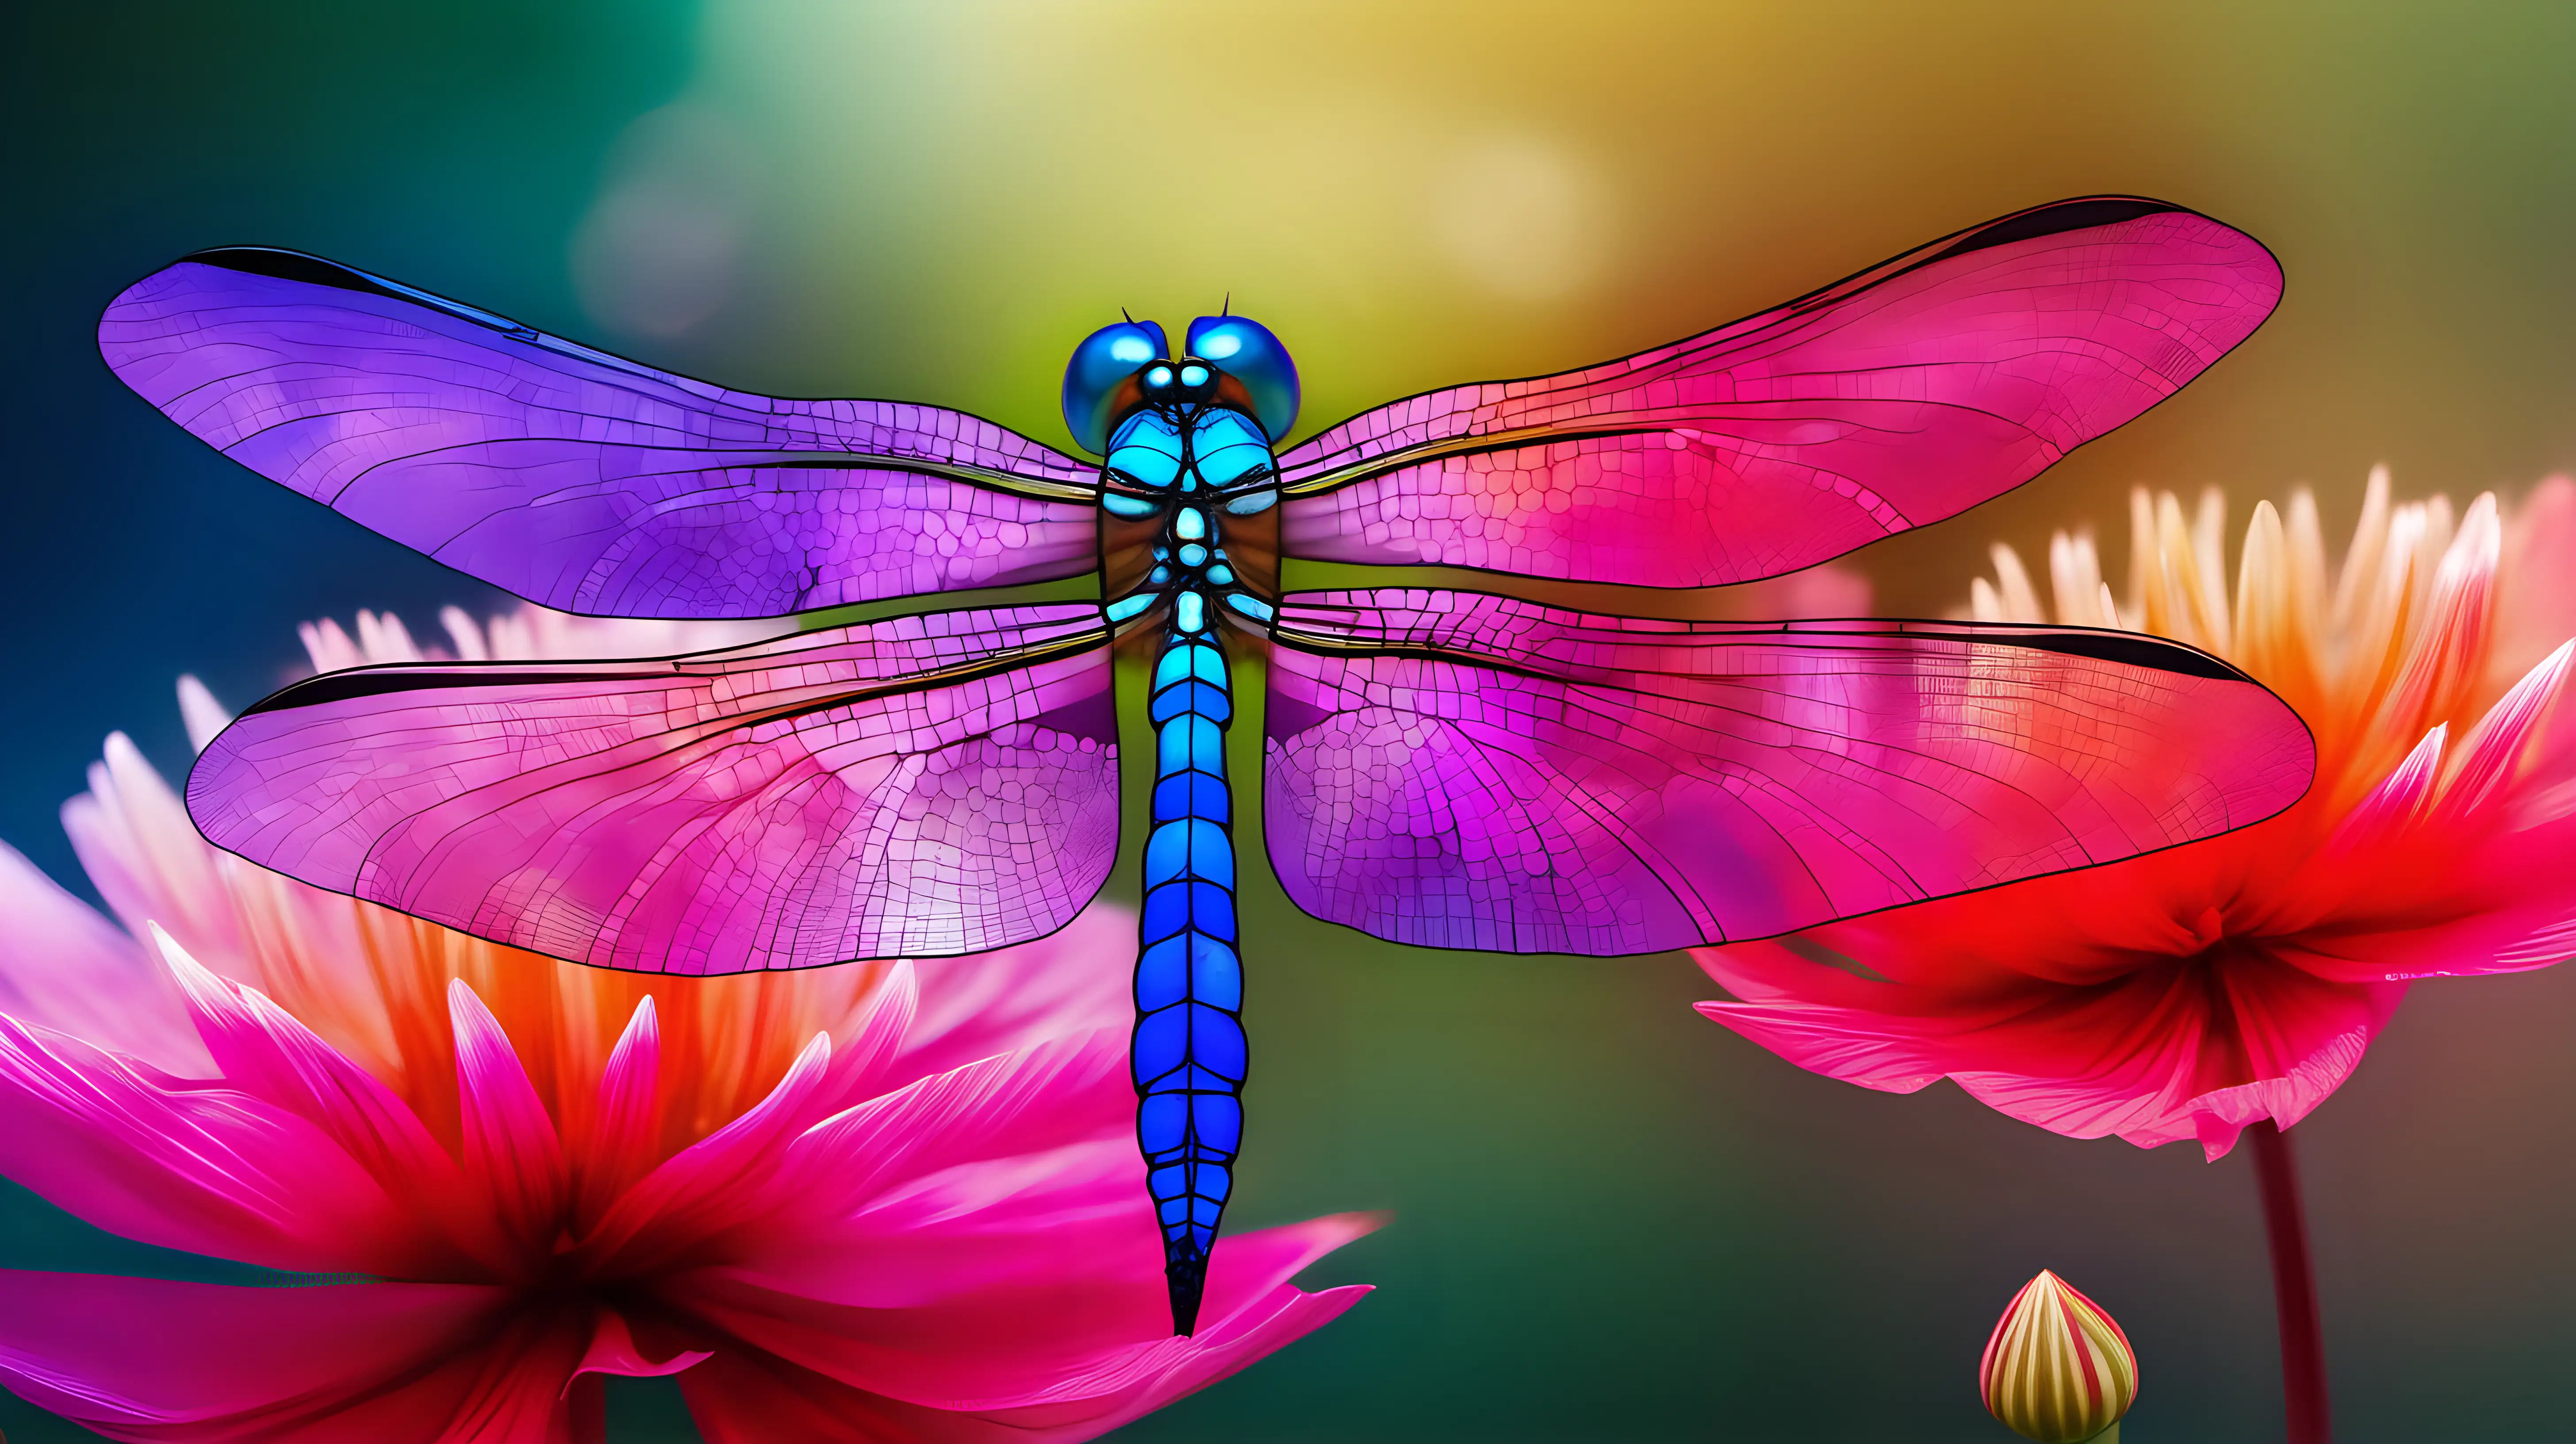 Dragonfly Resting on Vibrant Flower Translucent Wings and Floral Hues